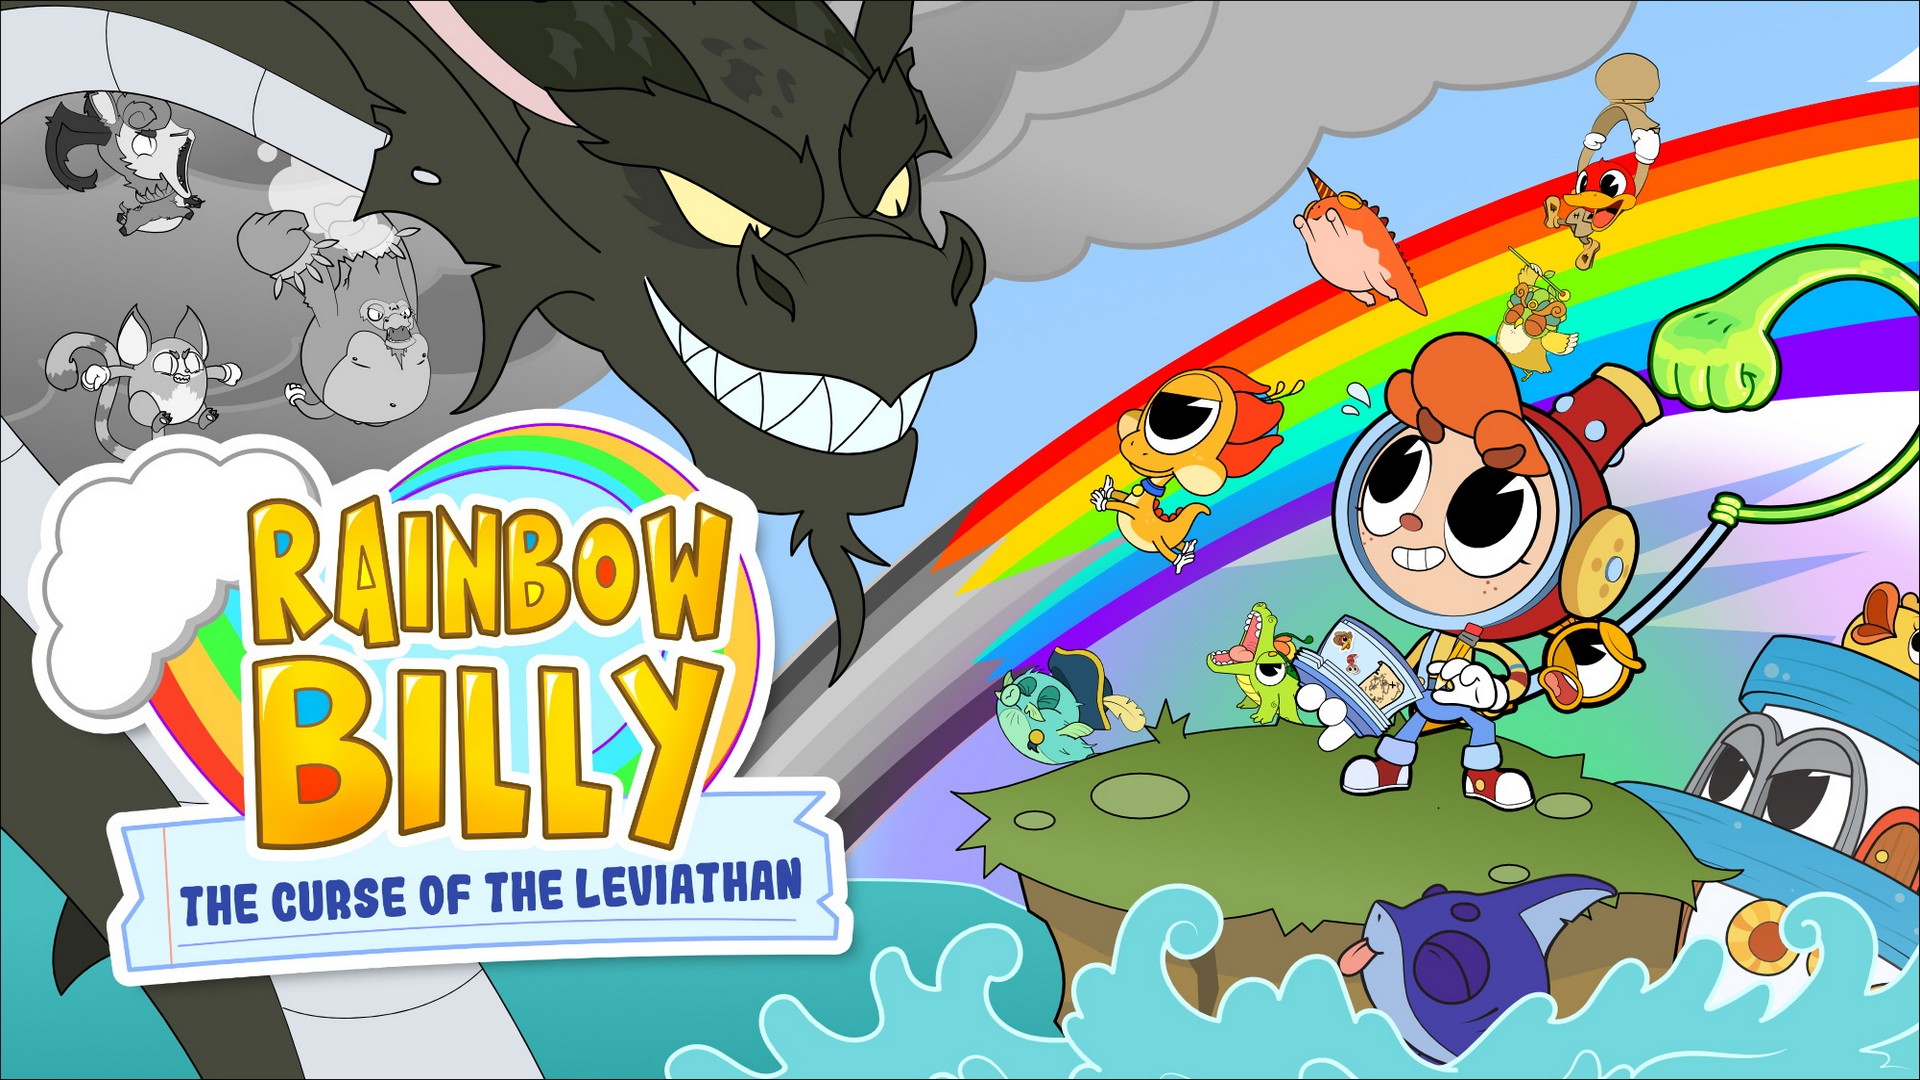 Check Out Rainbow Billy: The Curse of the Leviathan’s New Accolades Trailer